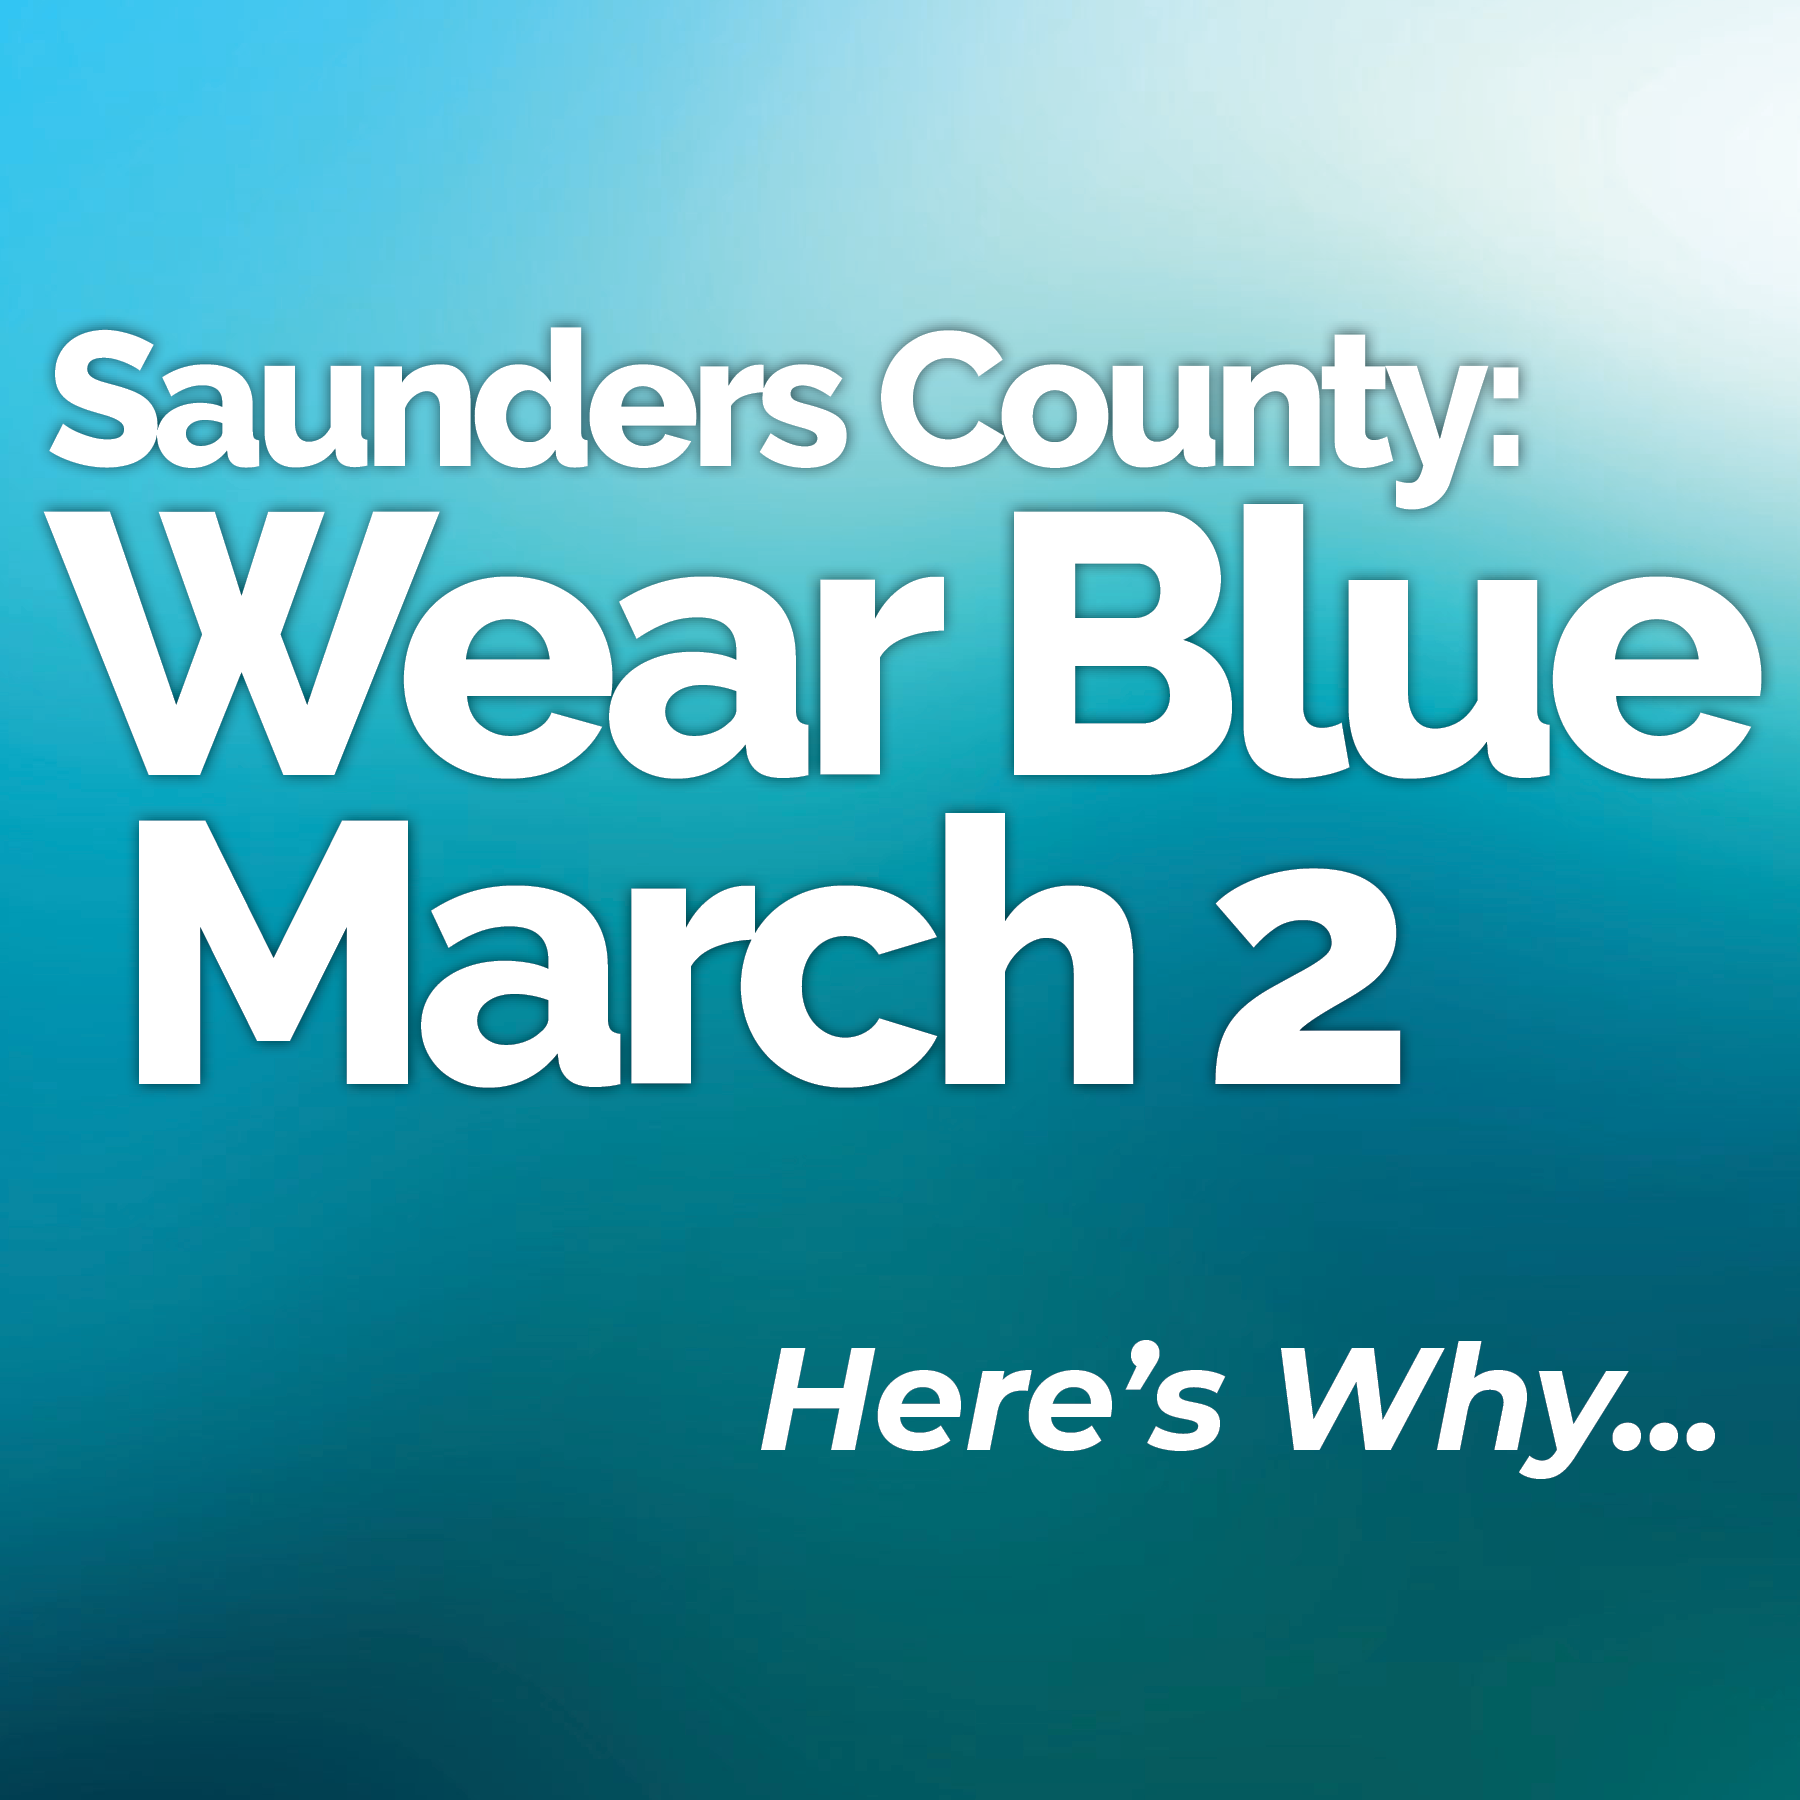 Saunders County: Wear Blue on March 2!